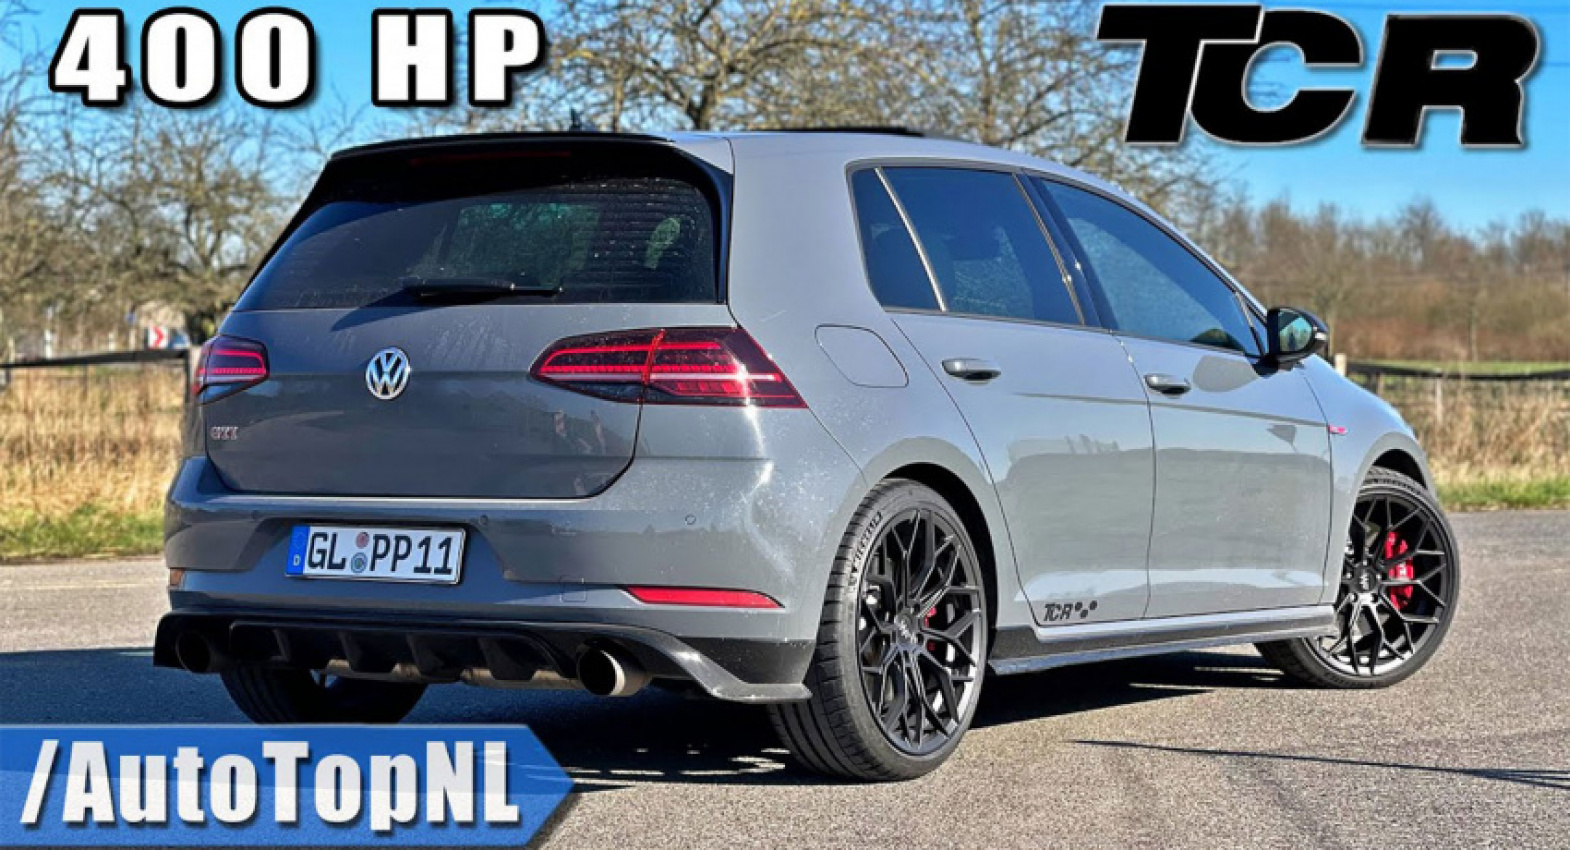 autos, cars, hp, news, hot hatch, tuning, video, vw golf, vw golf gti, vw videos, of course a 400 hp vw golf gti tcr is a serious performer